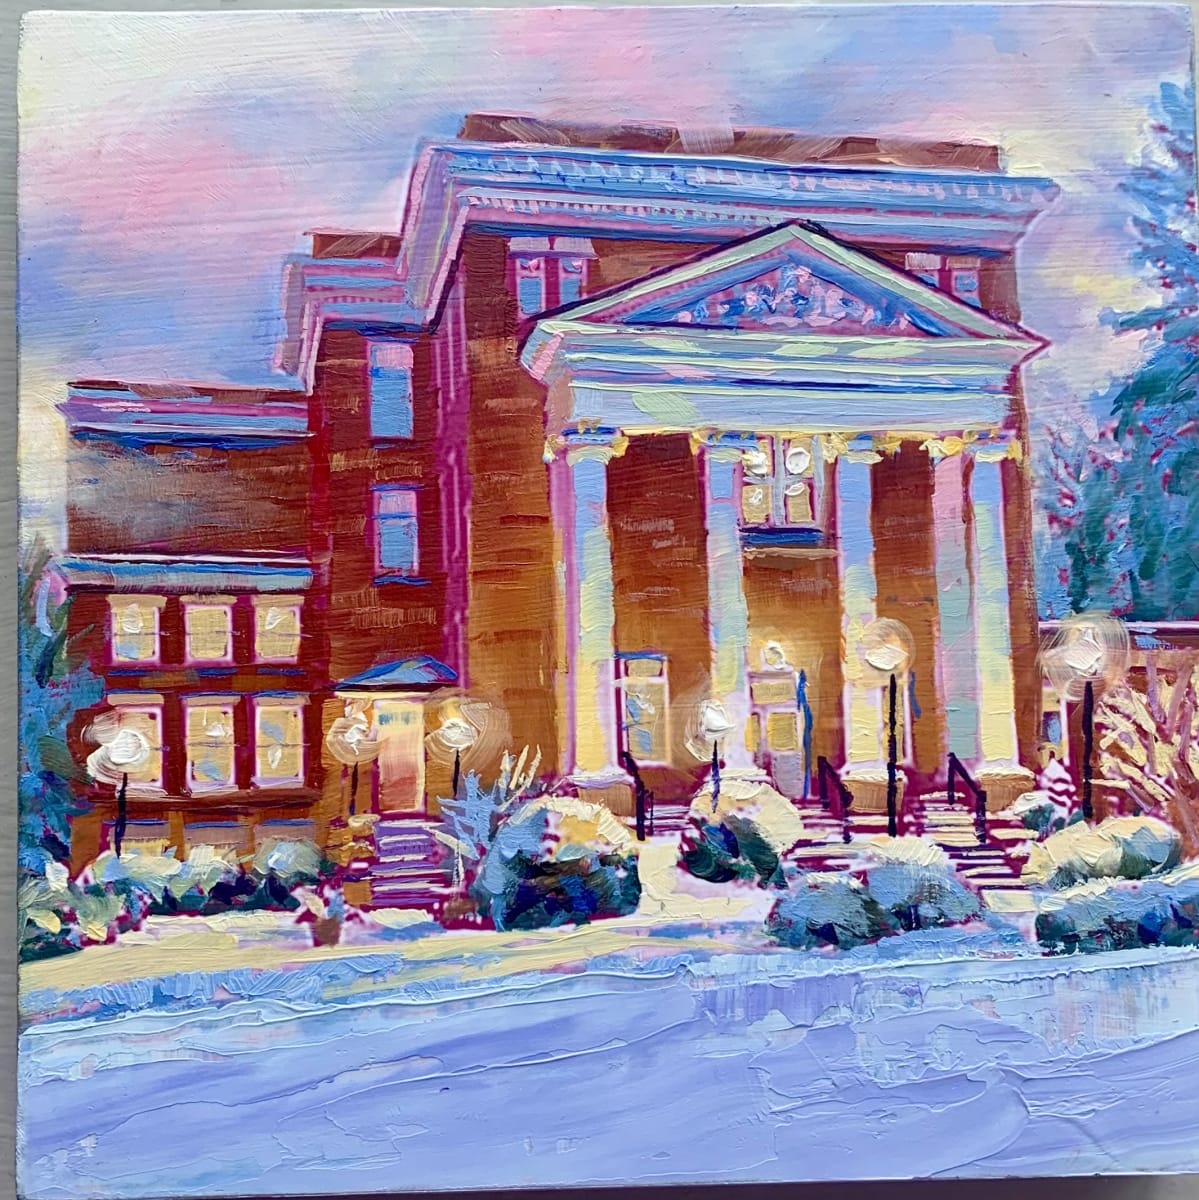 Twilight on Carnegie Hall by Pat Cross  Image: 6x6 oil Painting
